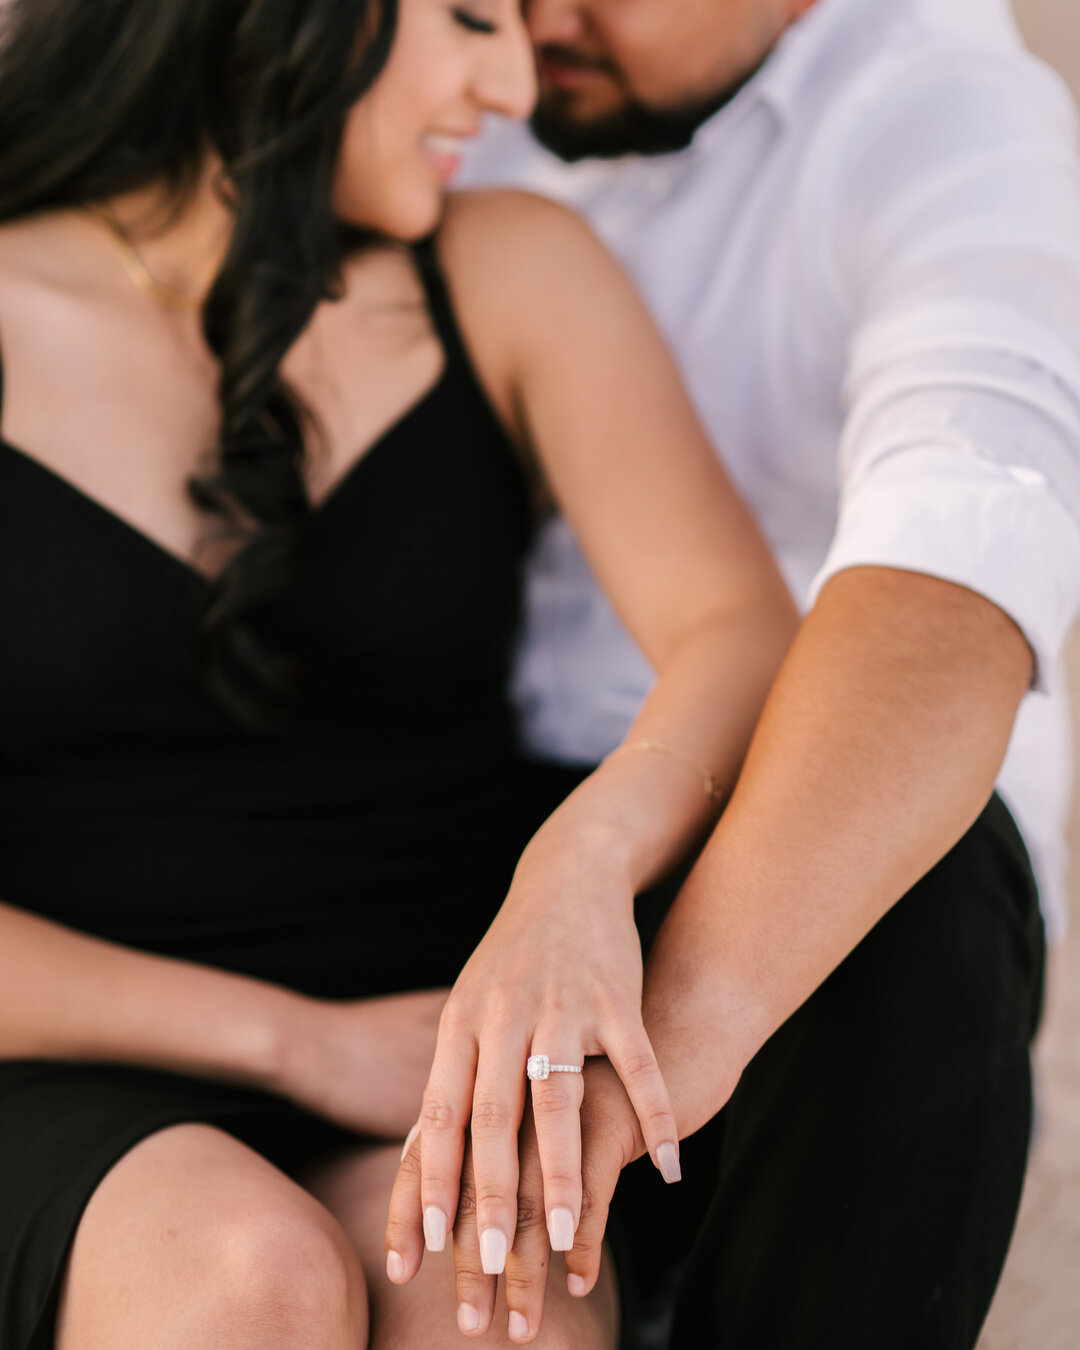 Coming up with captions is hard.  So I'll just let this one speak for itself.  XO
.
.
.
.
. #proposal #engagementring #proposalphotography #lasvegasproposals #lasvegasproposalphotographer #lasvegasengagementpho